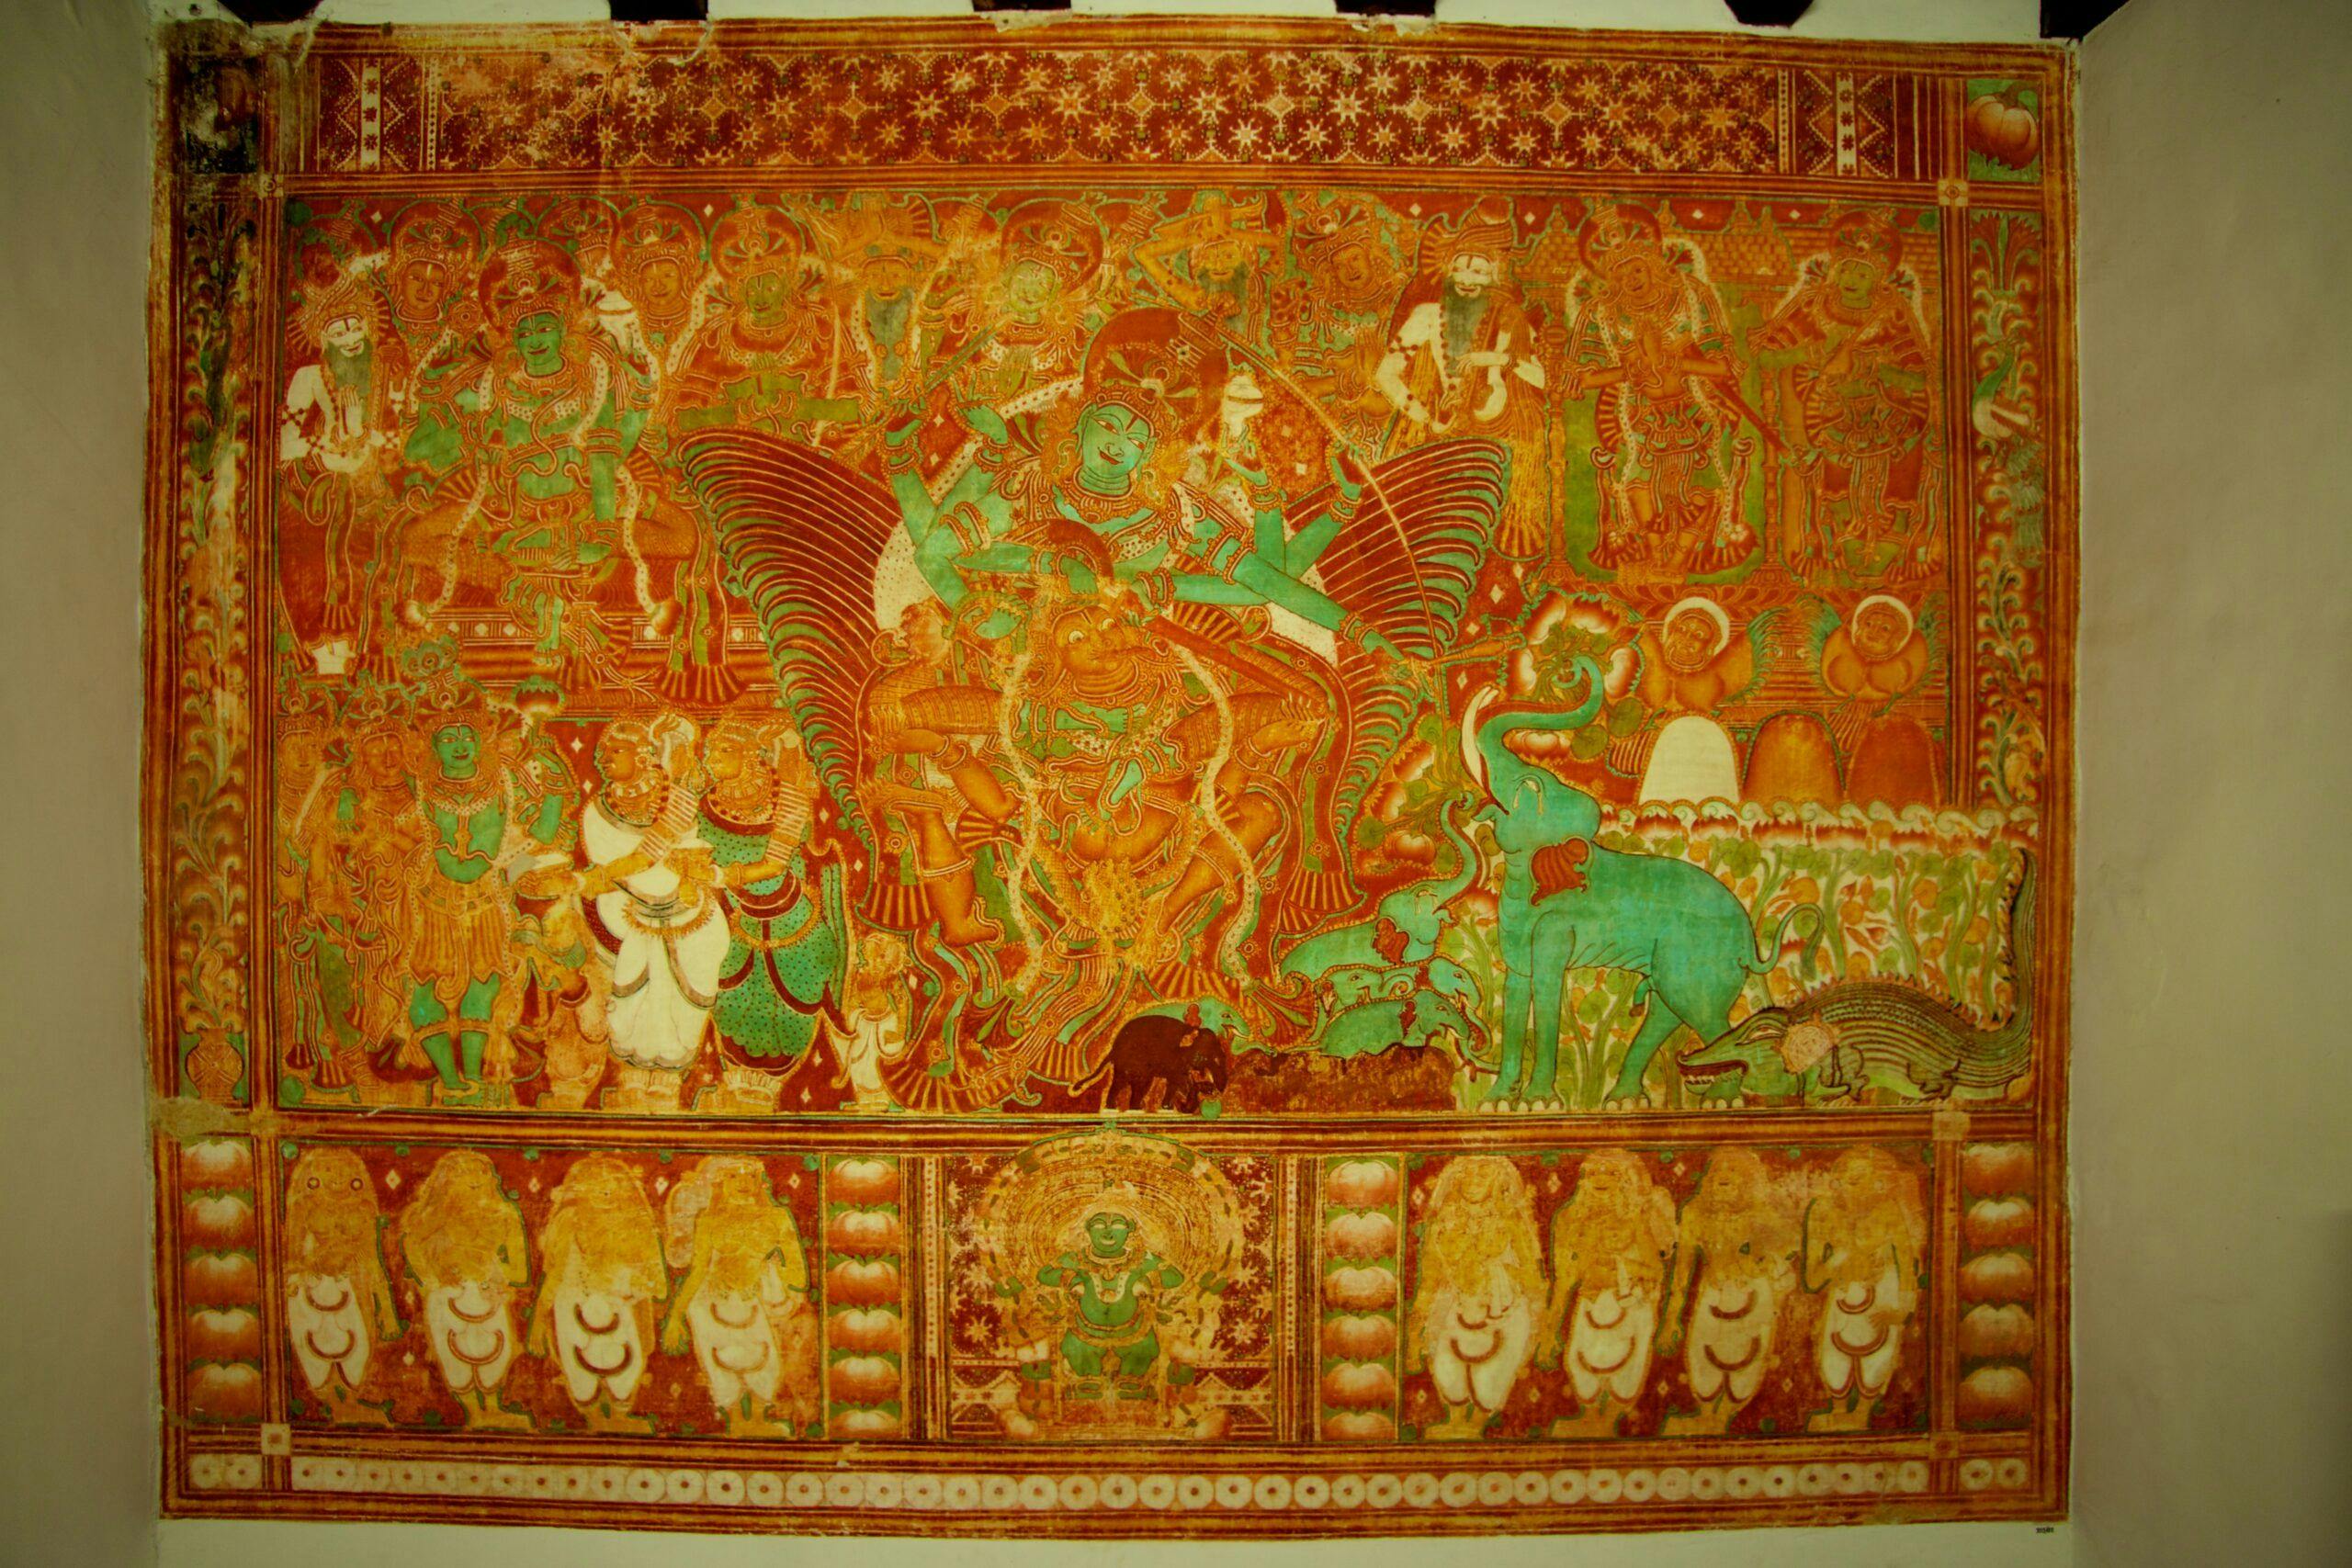 Mural depicting Gajendramoksham (an elephant saluting Lord Vishnu, as the other gods, goddesses and sages look on in reverence)